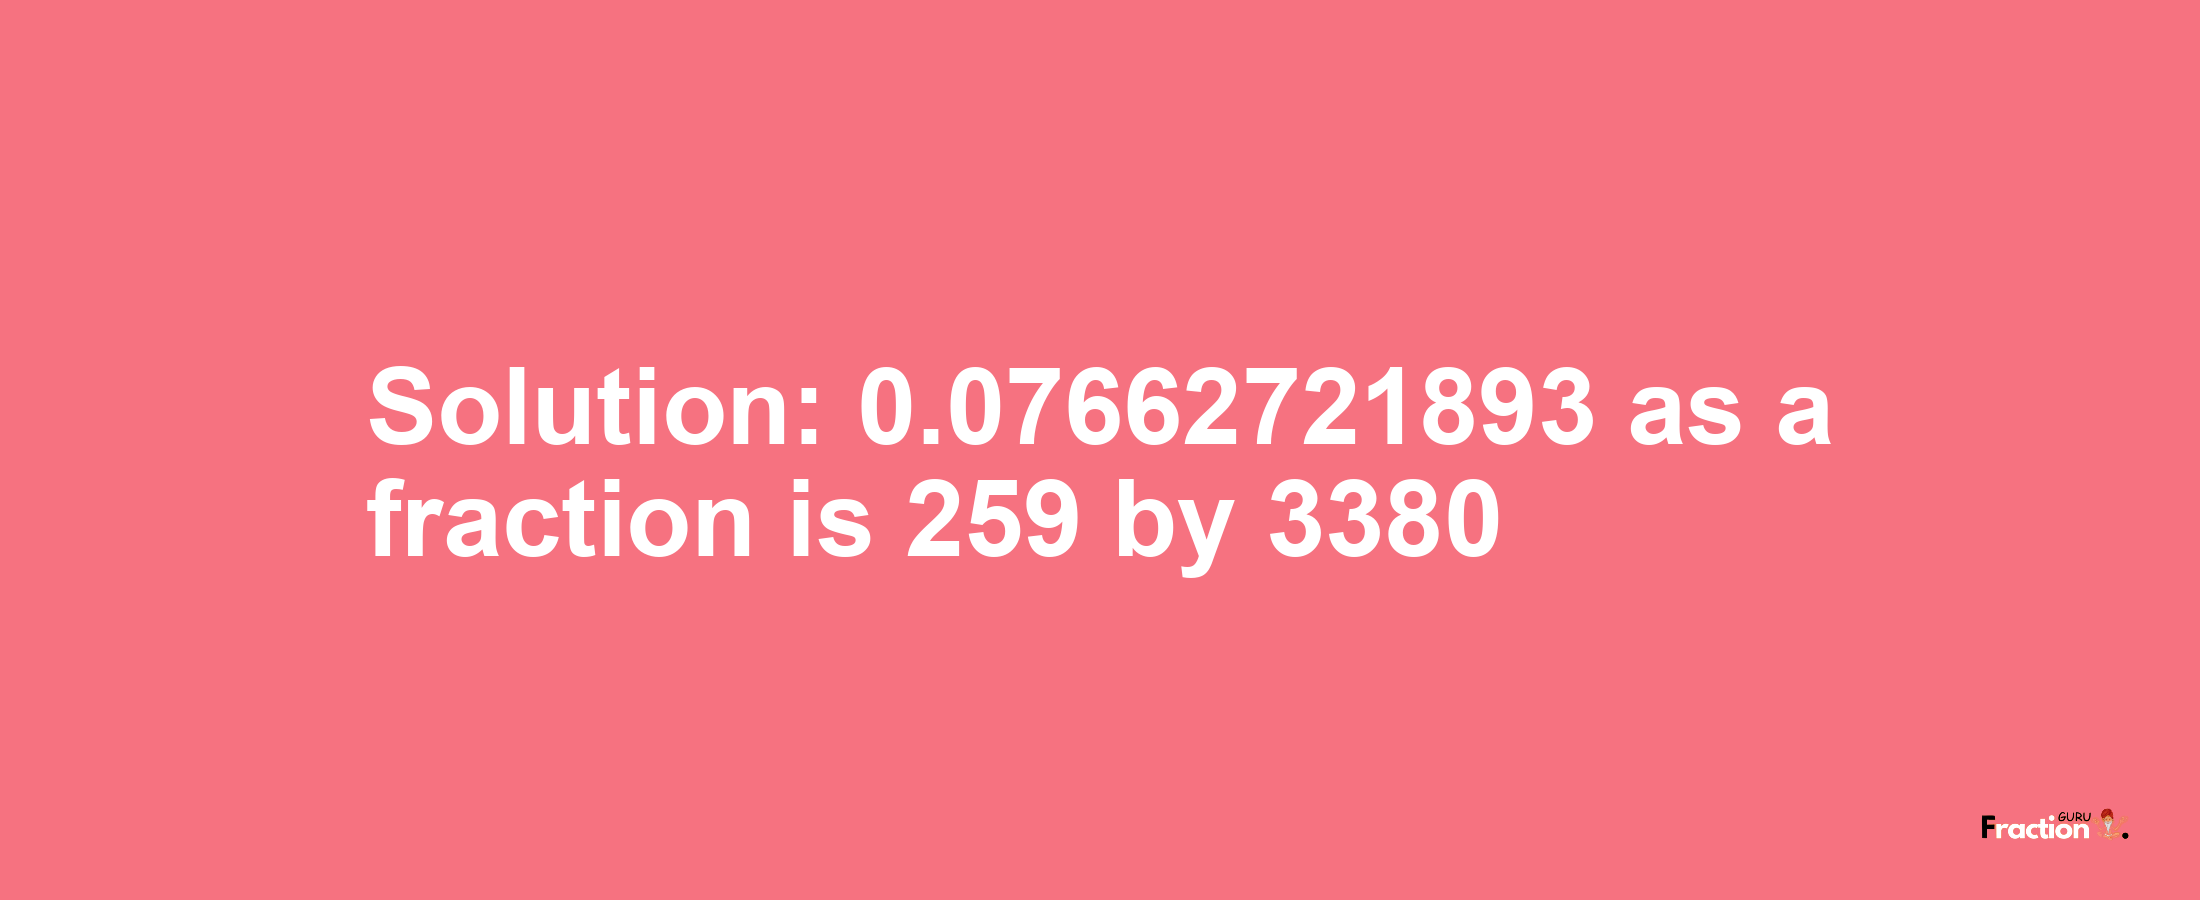 Solution:0.07662721893 as a fraction is 259/3380